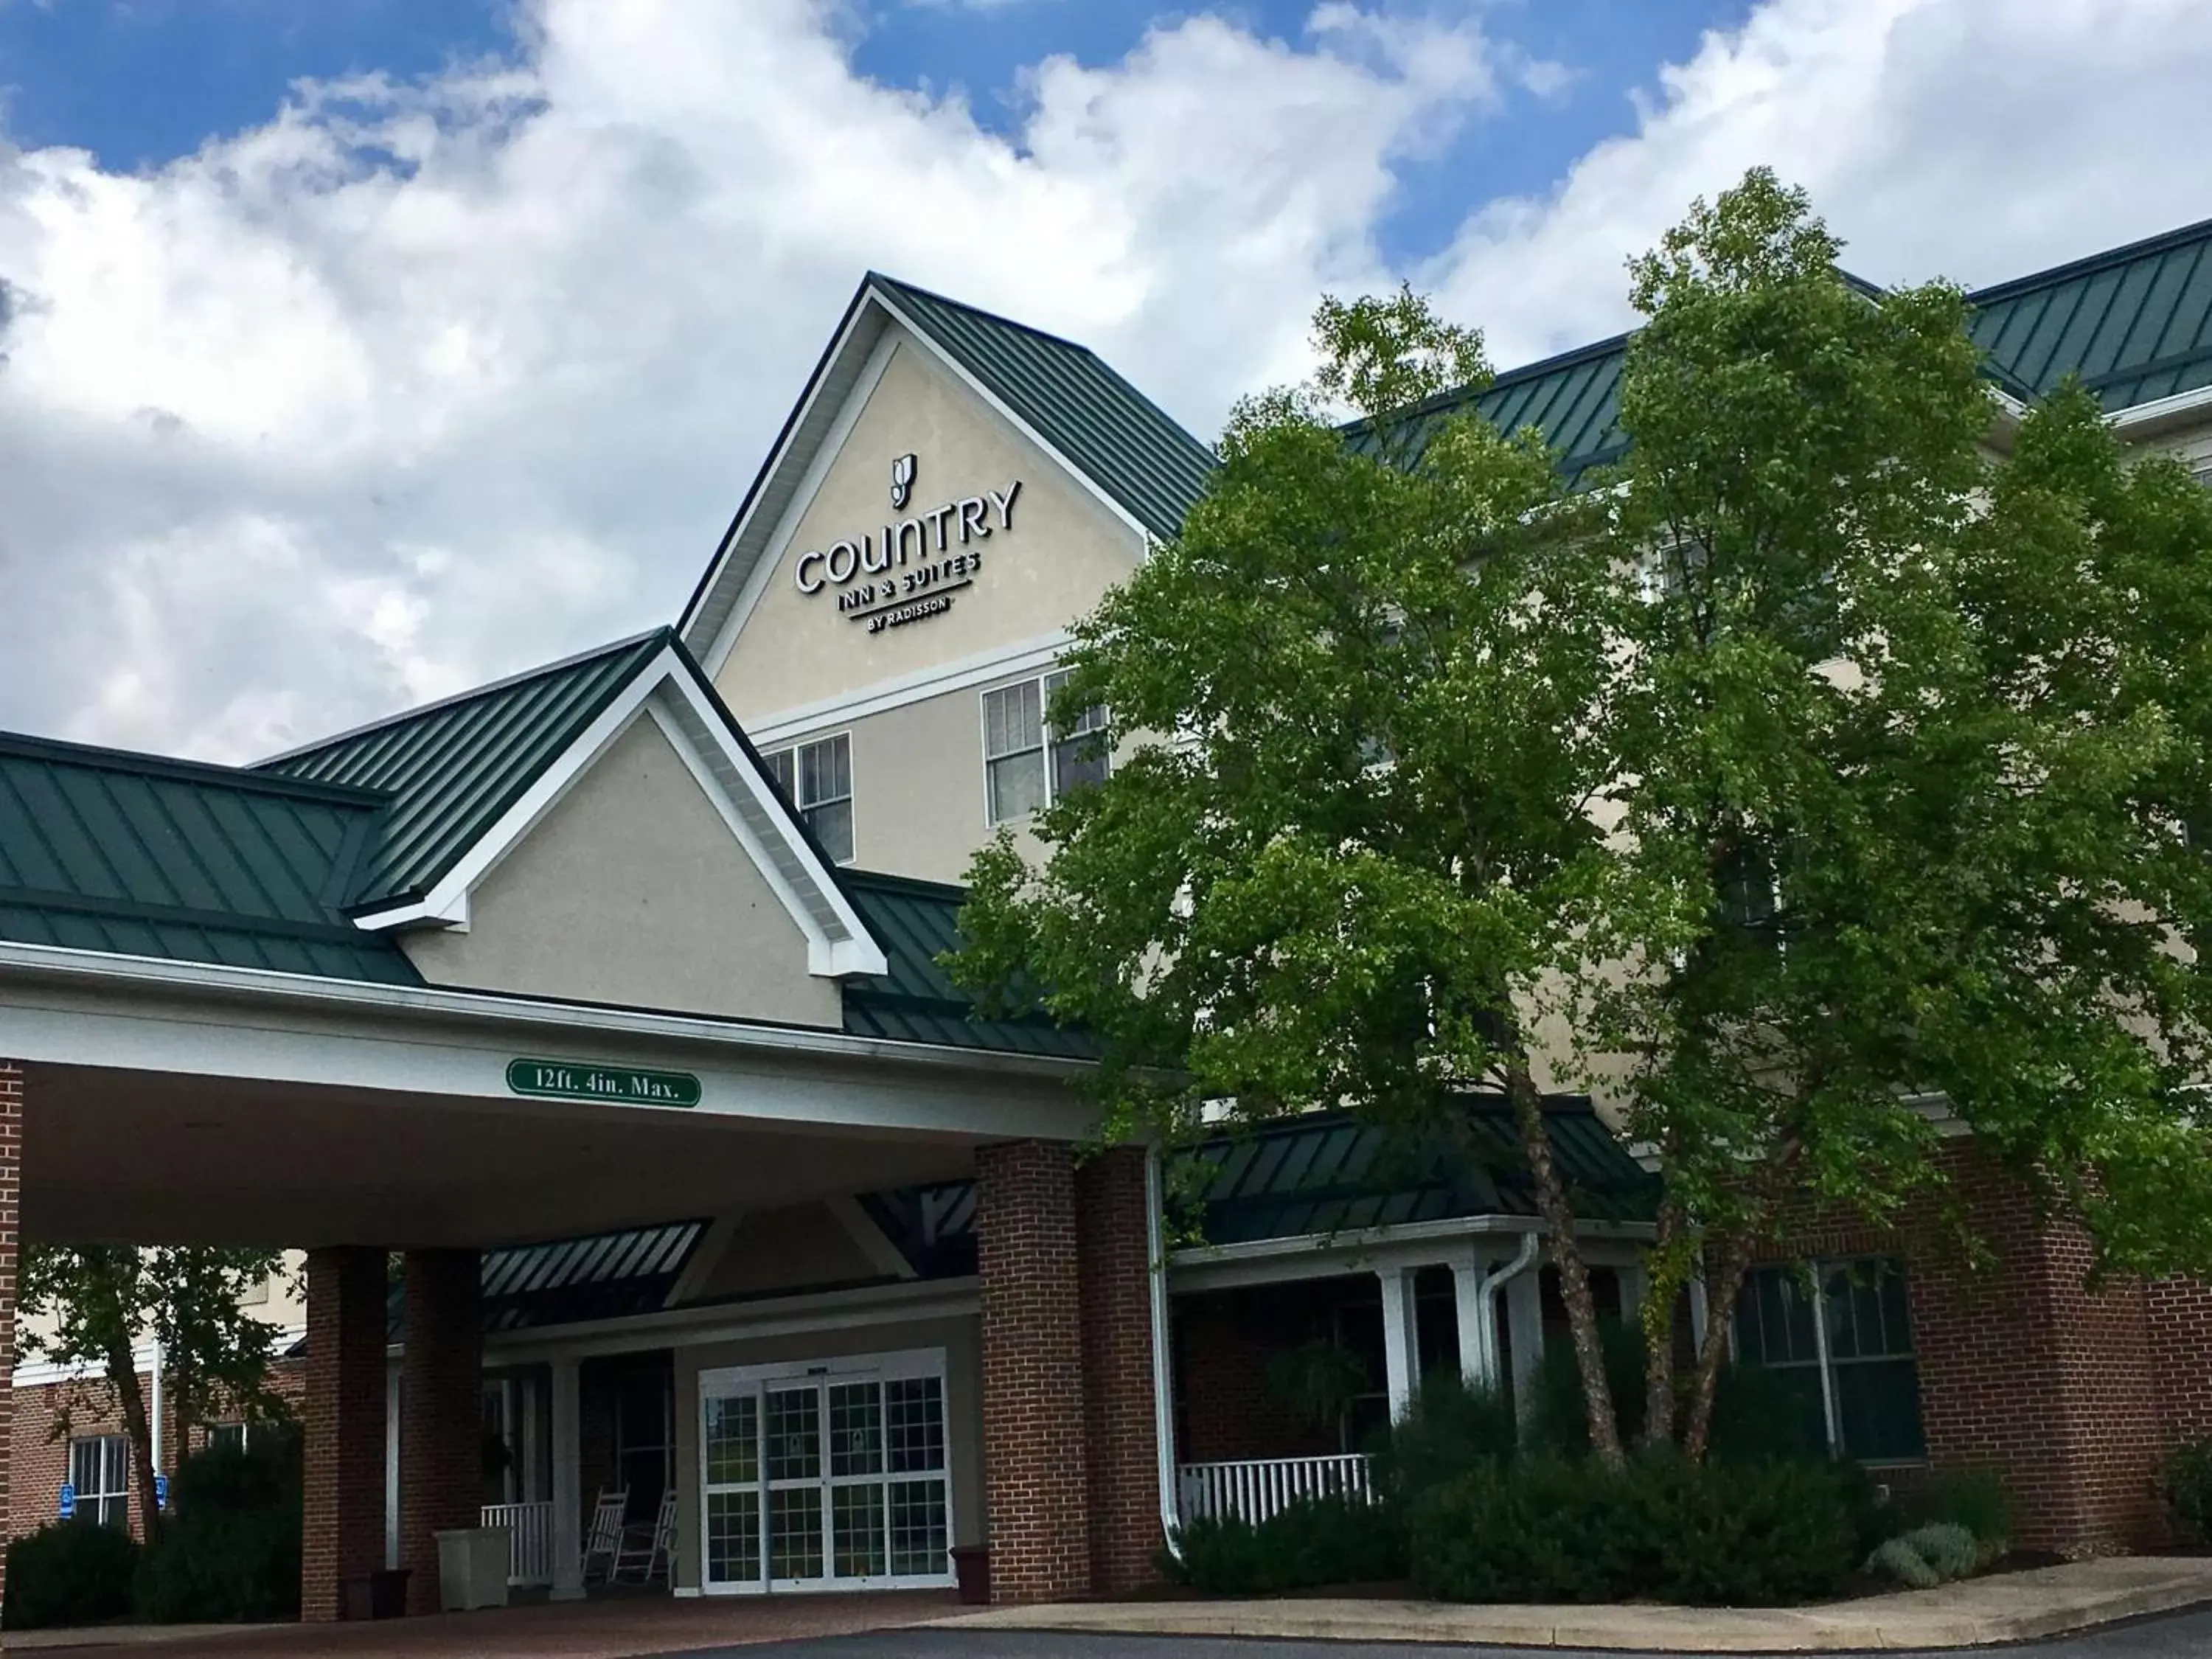 Property Building in Country Inn & Suites by Radisson, Lewisburg, PA